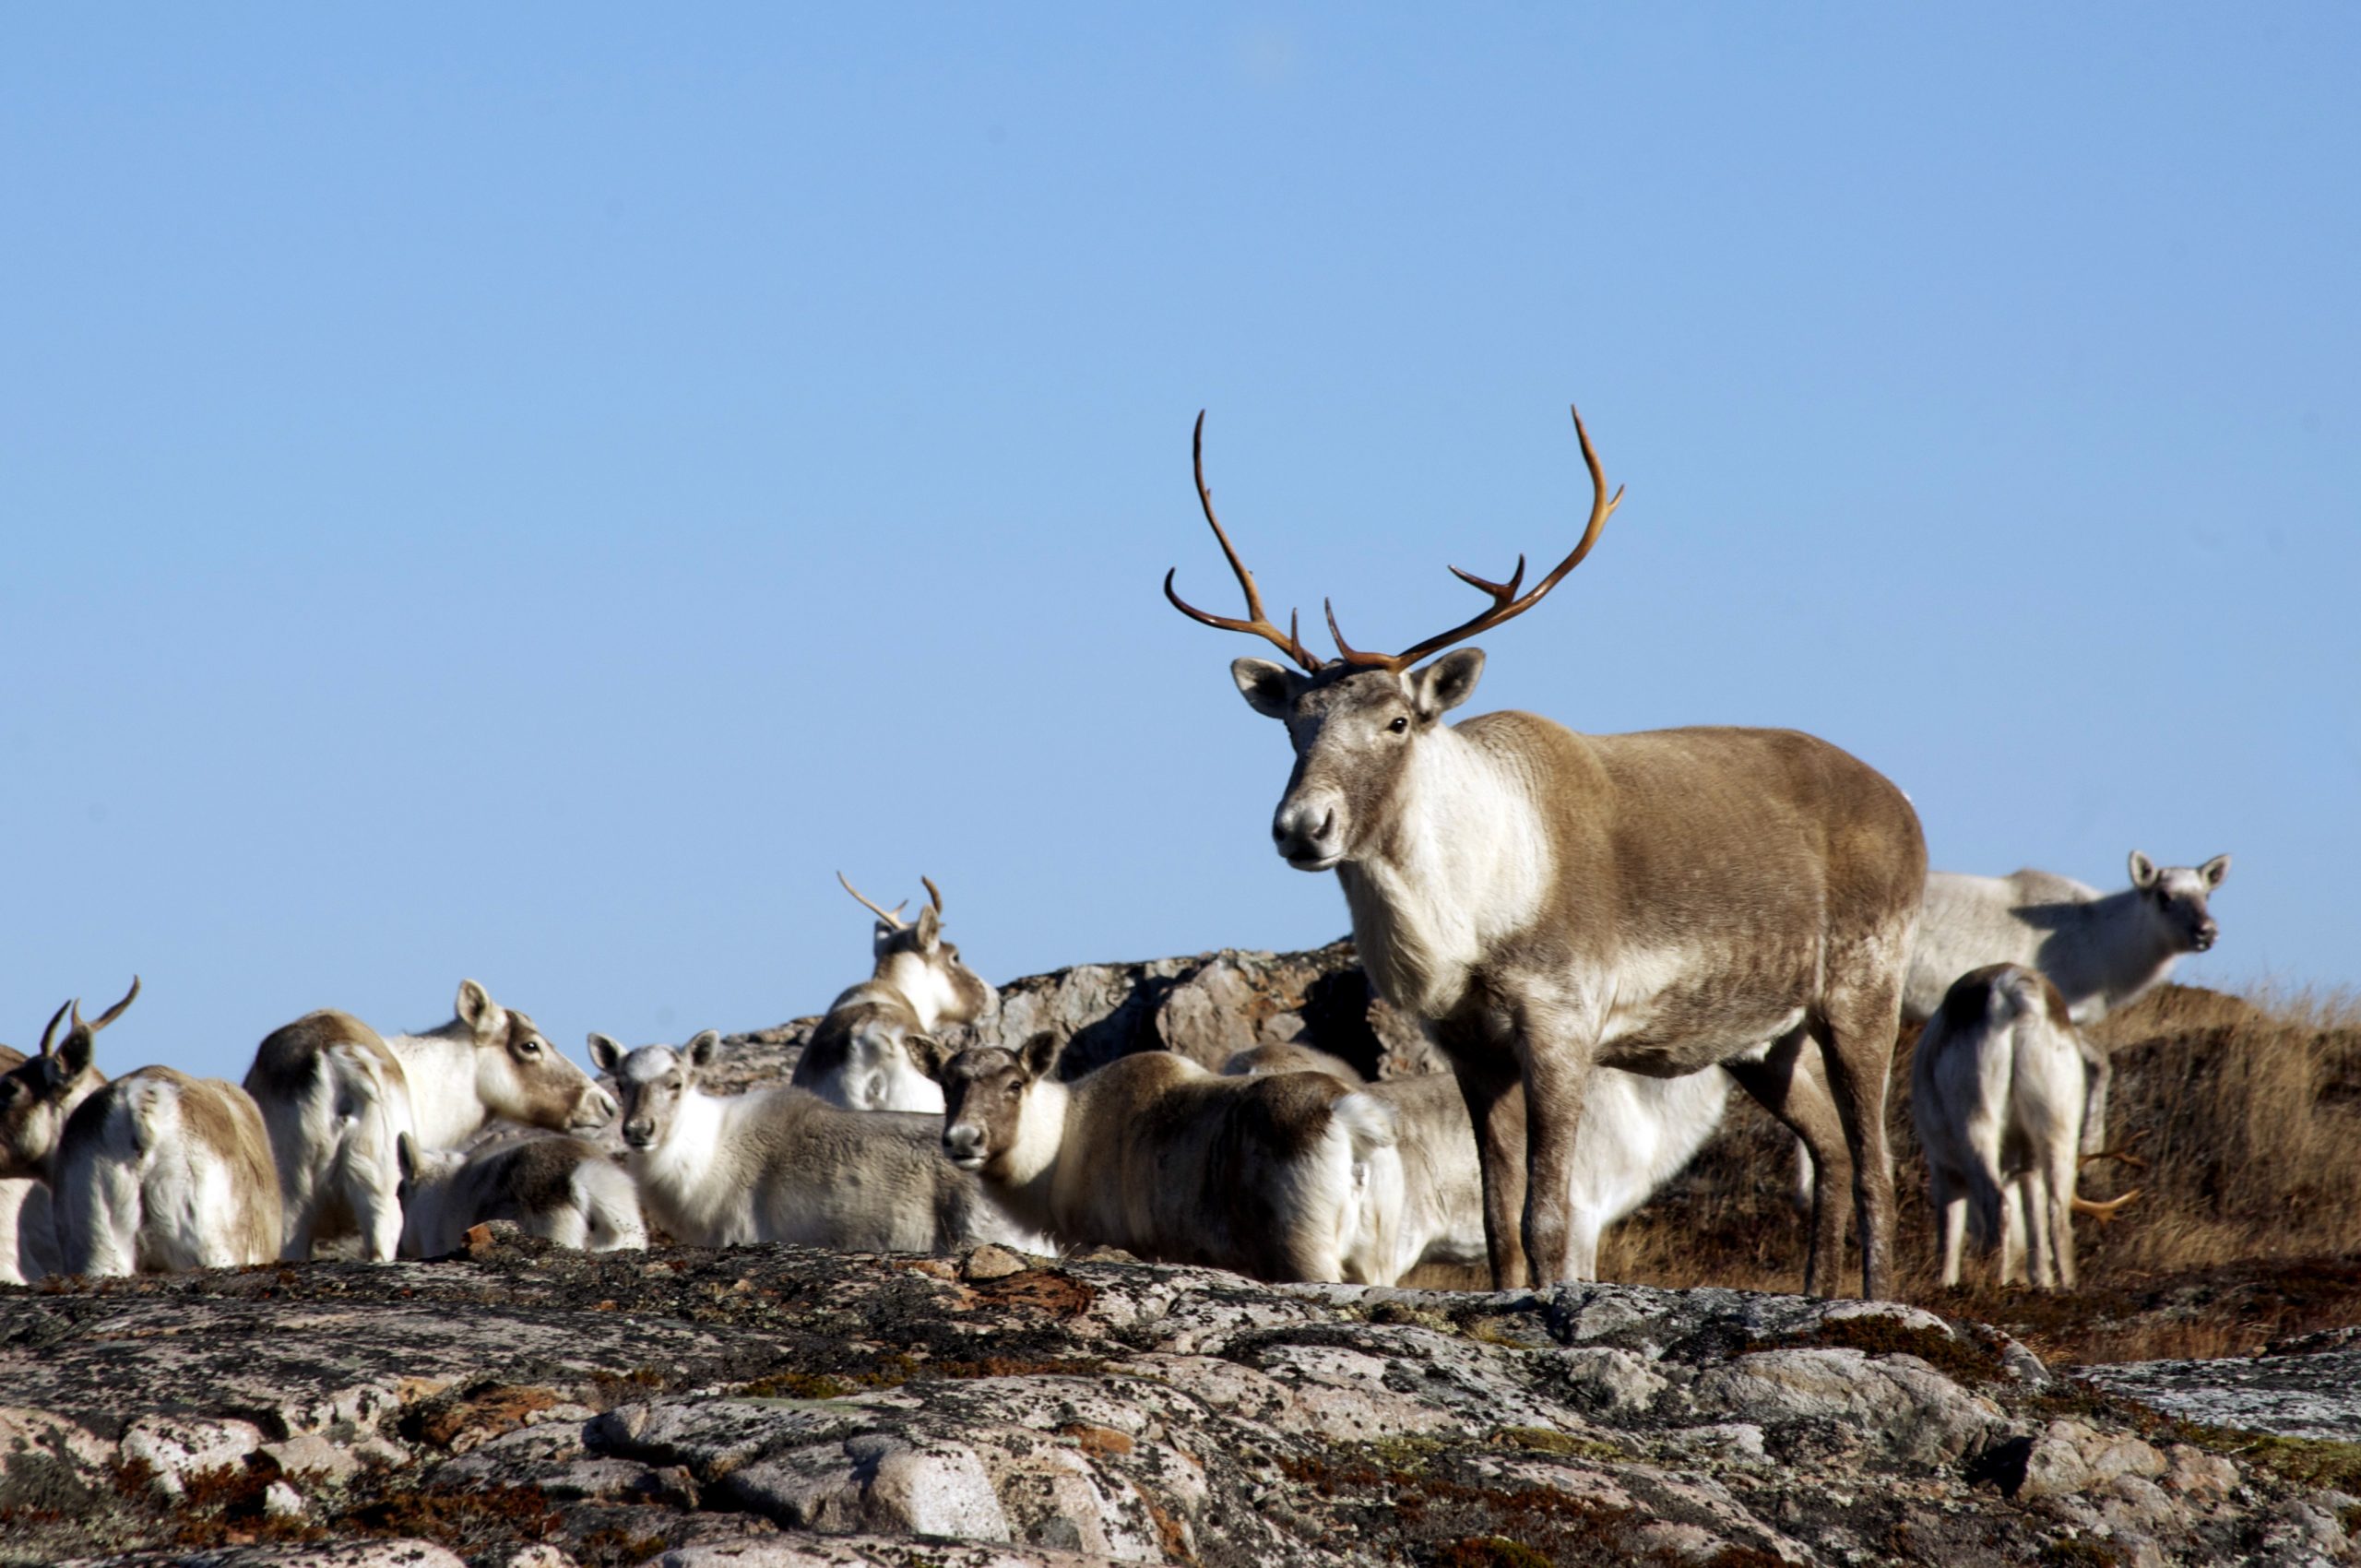 A small herd of caribou gathers on lichen-covered rocks, below a clear blue sky. A single antlered caribou stands in the foreground.